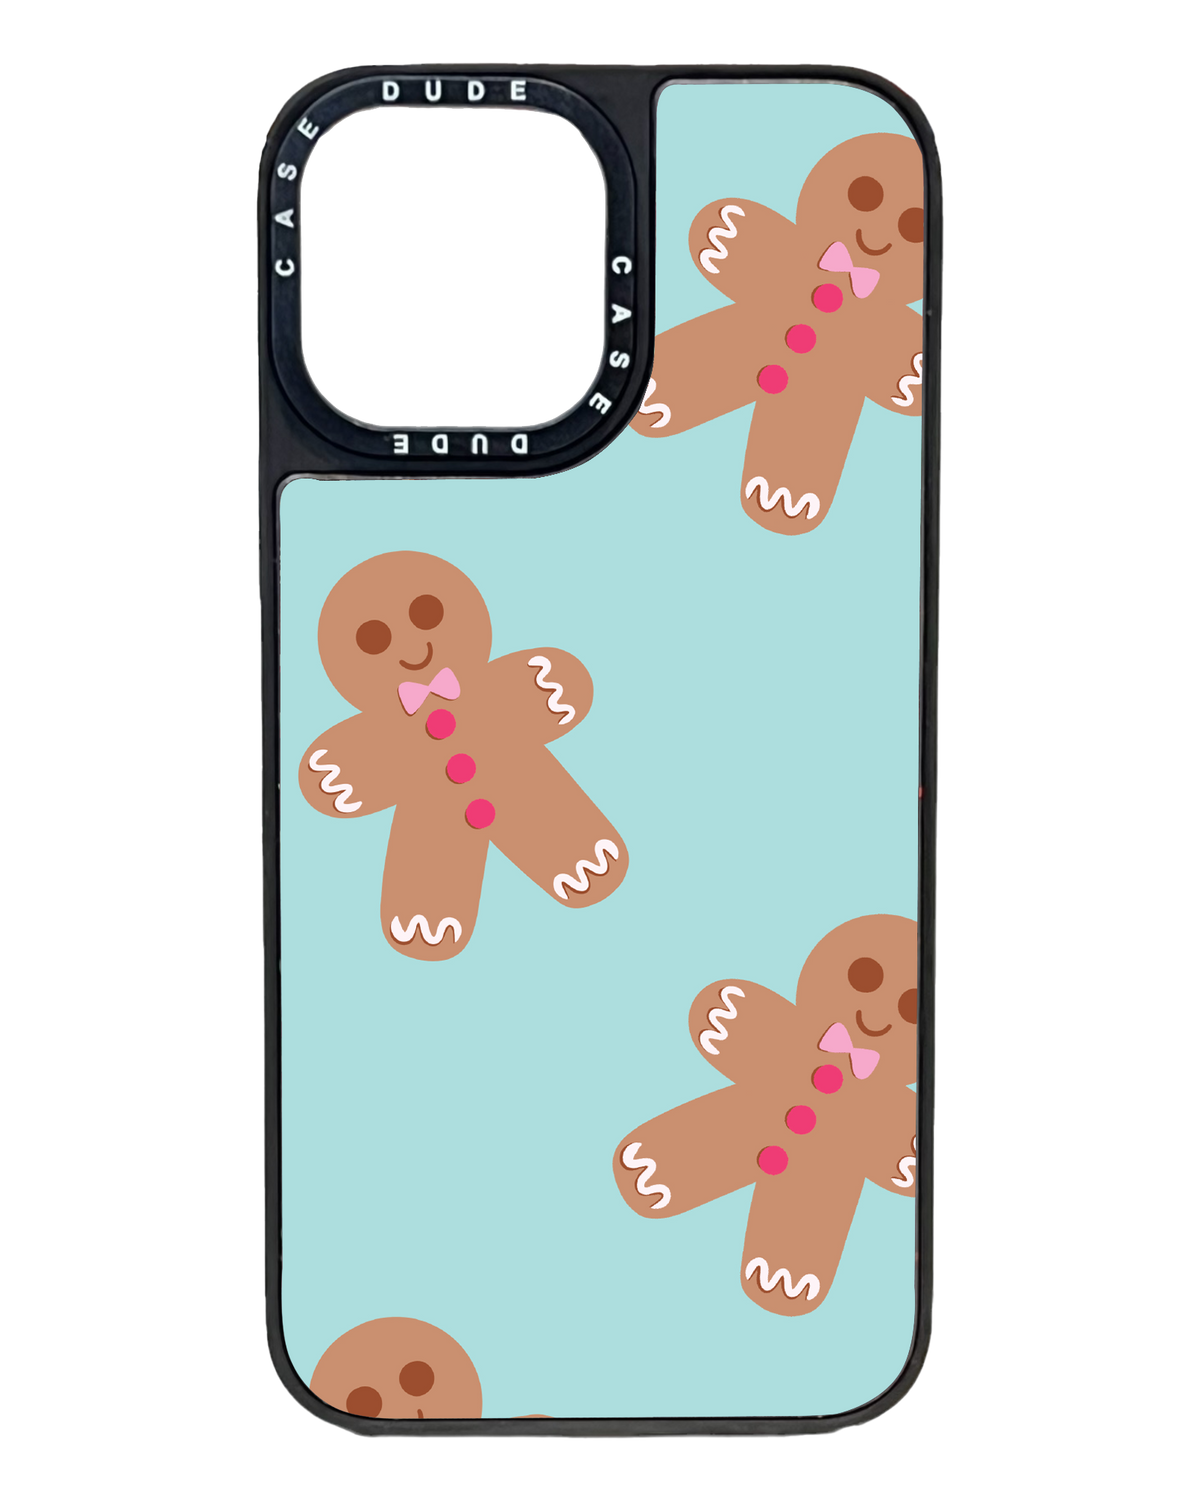 Christmas - iPhone case